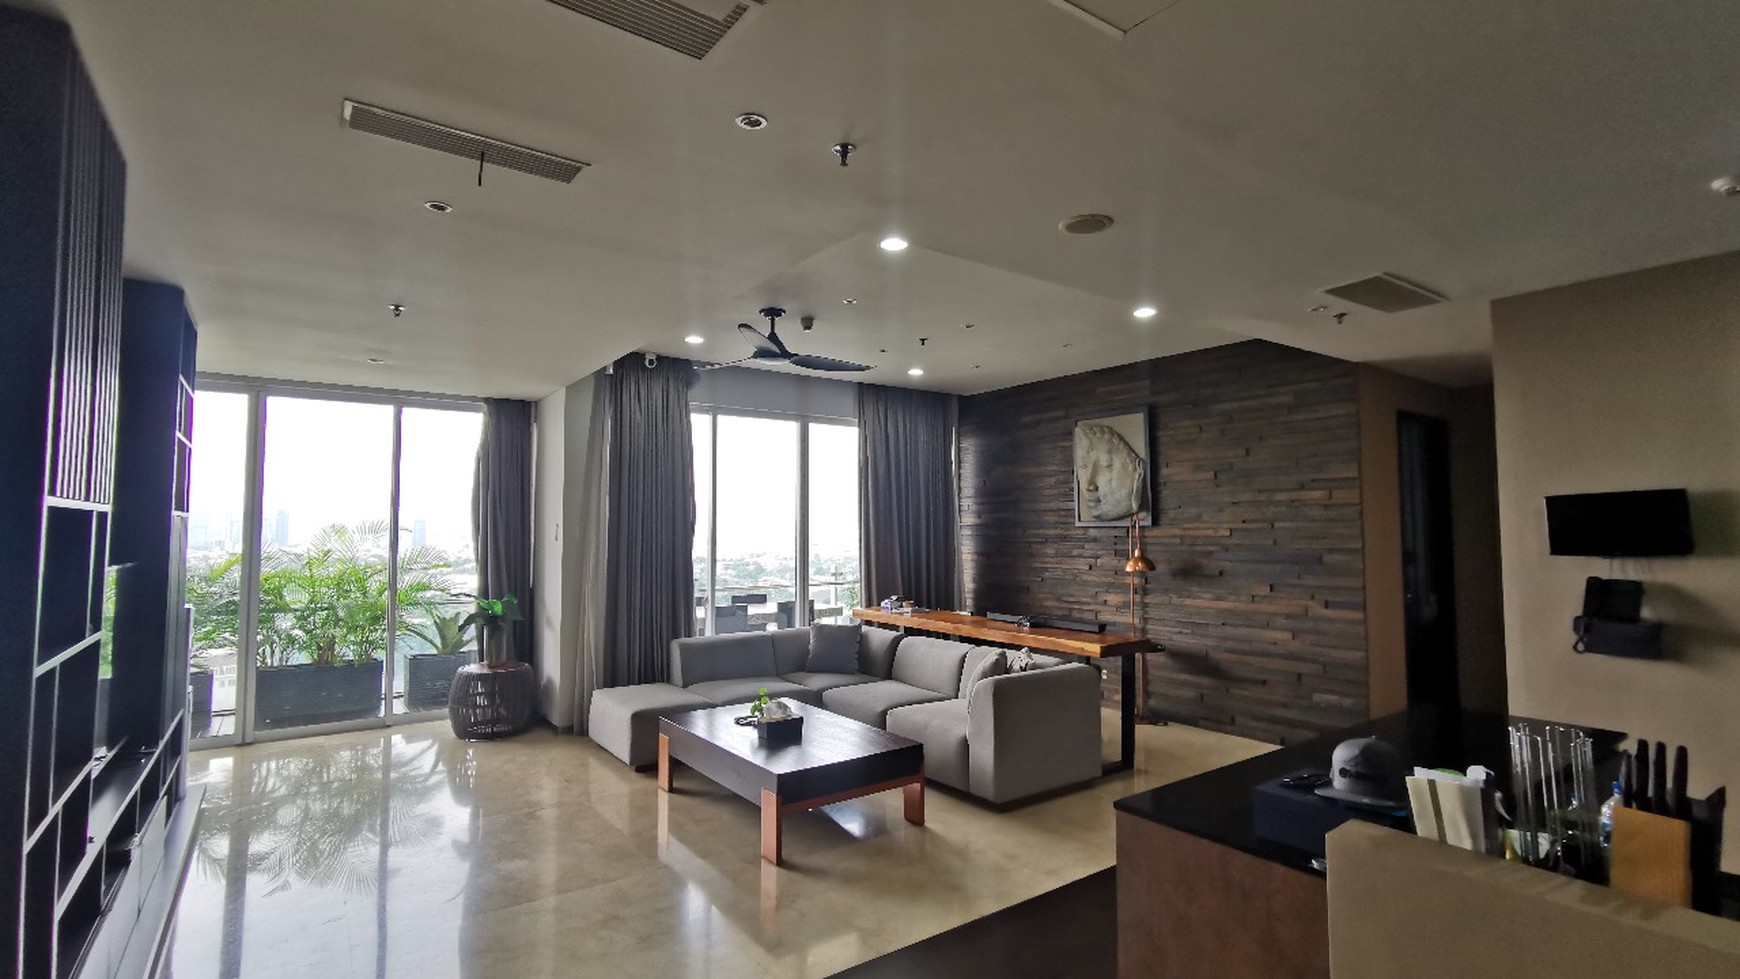 Luxury Penthouse Apartment in the Kemang Area, South Jakarta